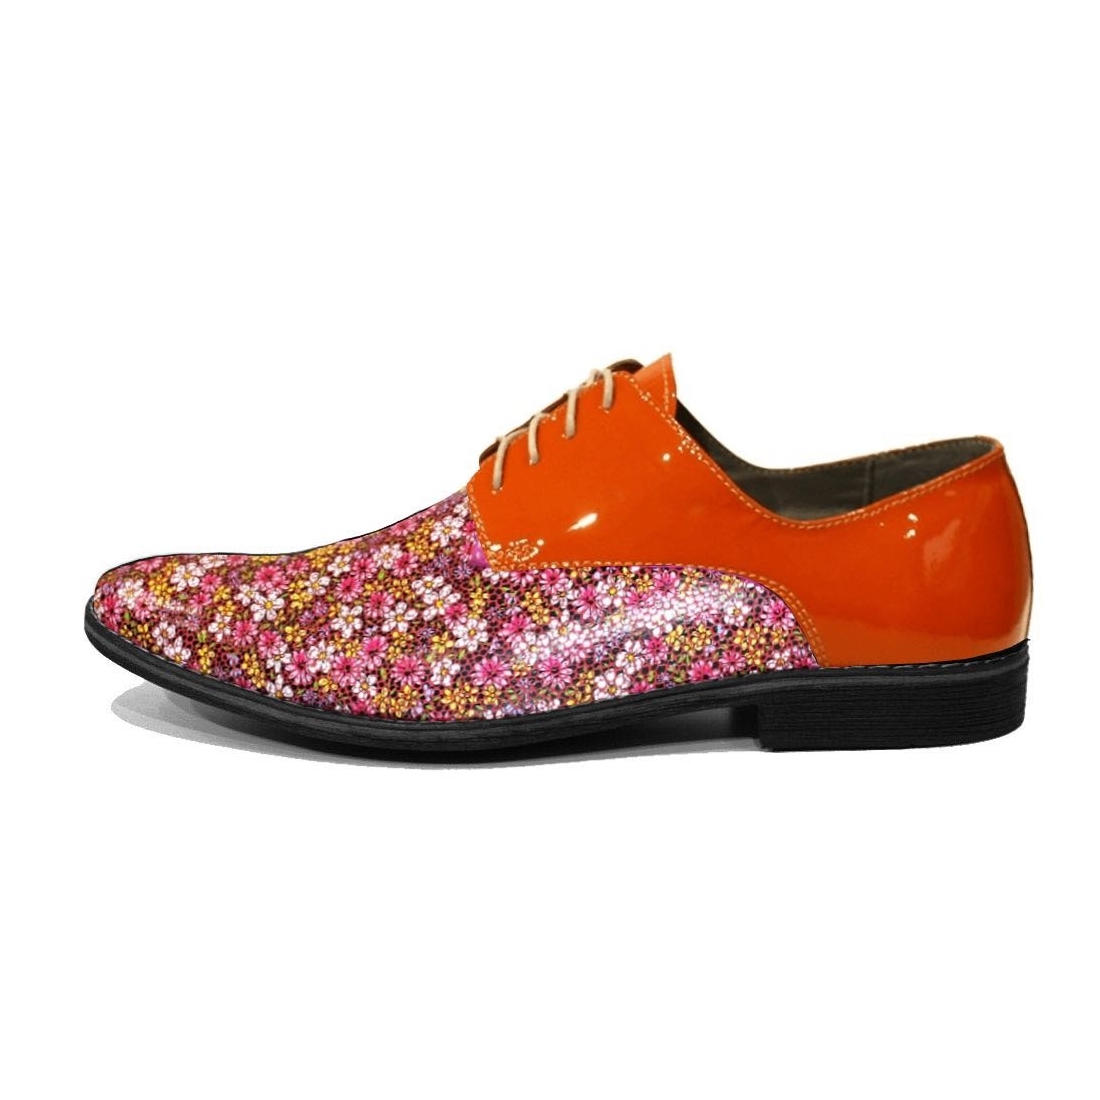 copy of Modello Fiolle - クラシックシューズ - Handmade Colorful Italian Leather Shoes